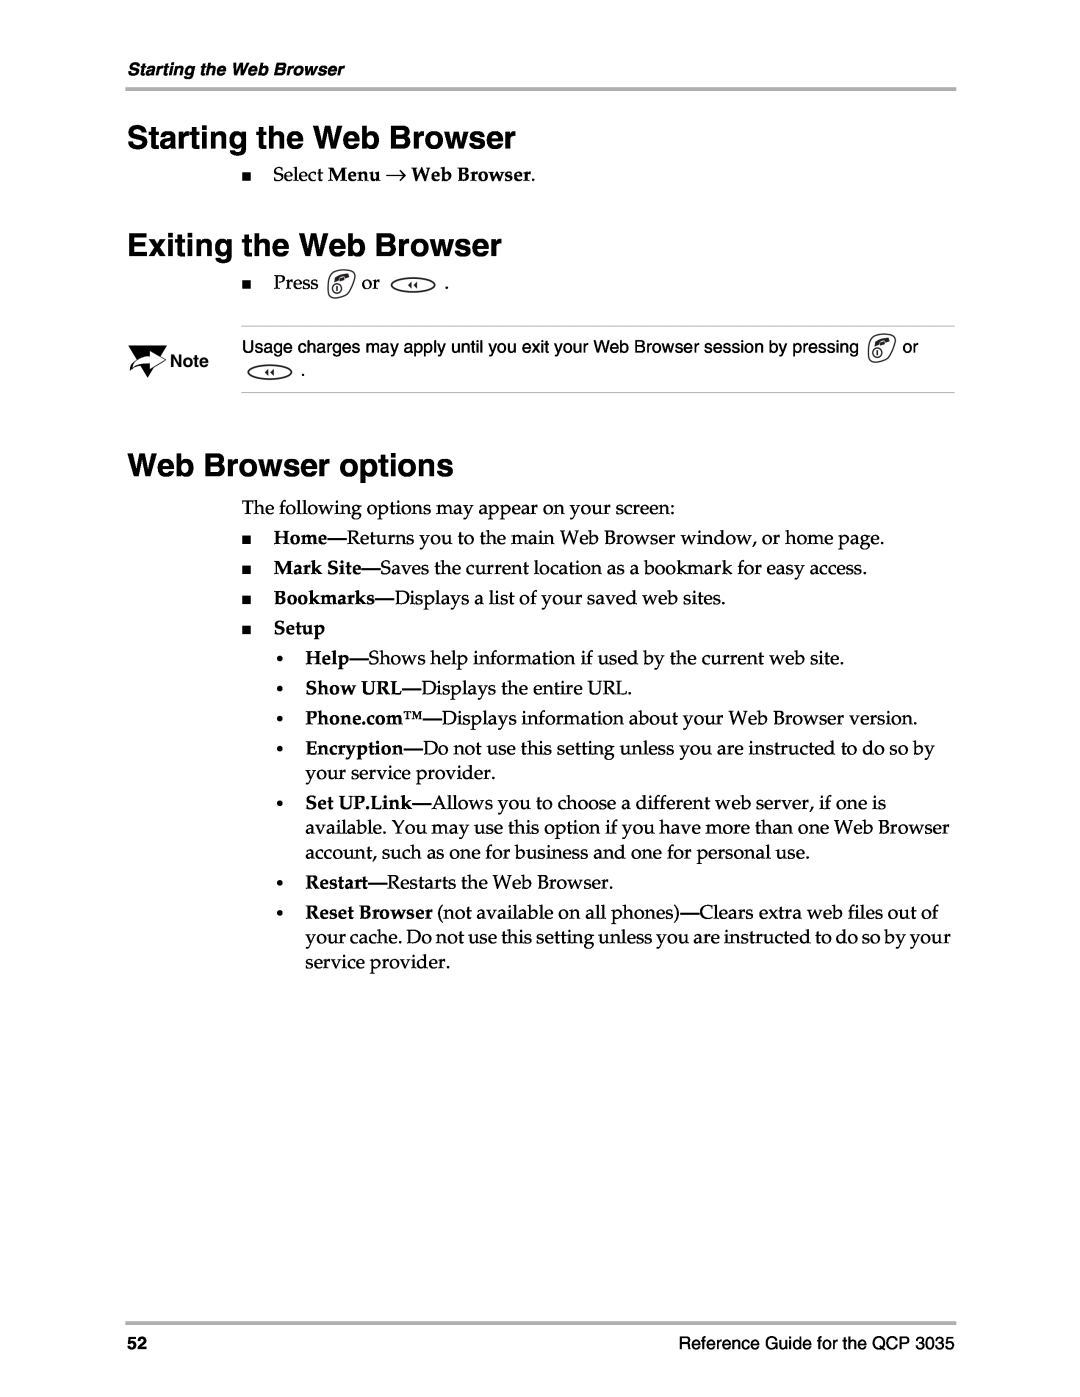 Kyocera 3035 Starting the Web Browser, Exiting the Web Browser, Web Browser options, Select Menu → Web Browser, Setup 